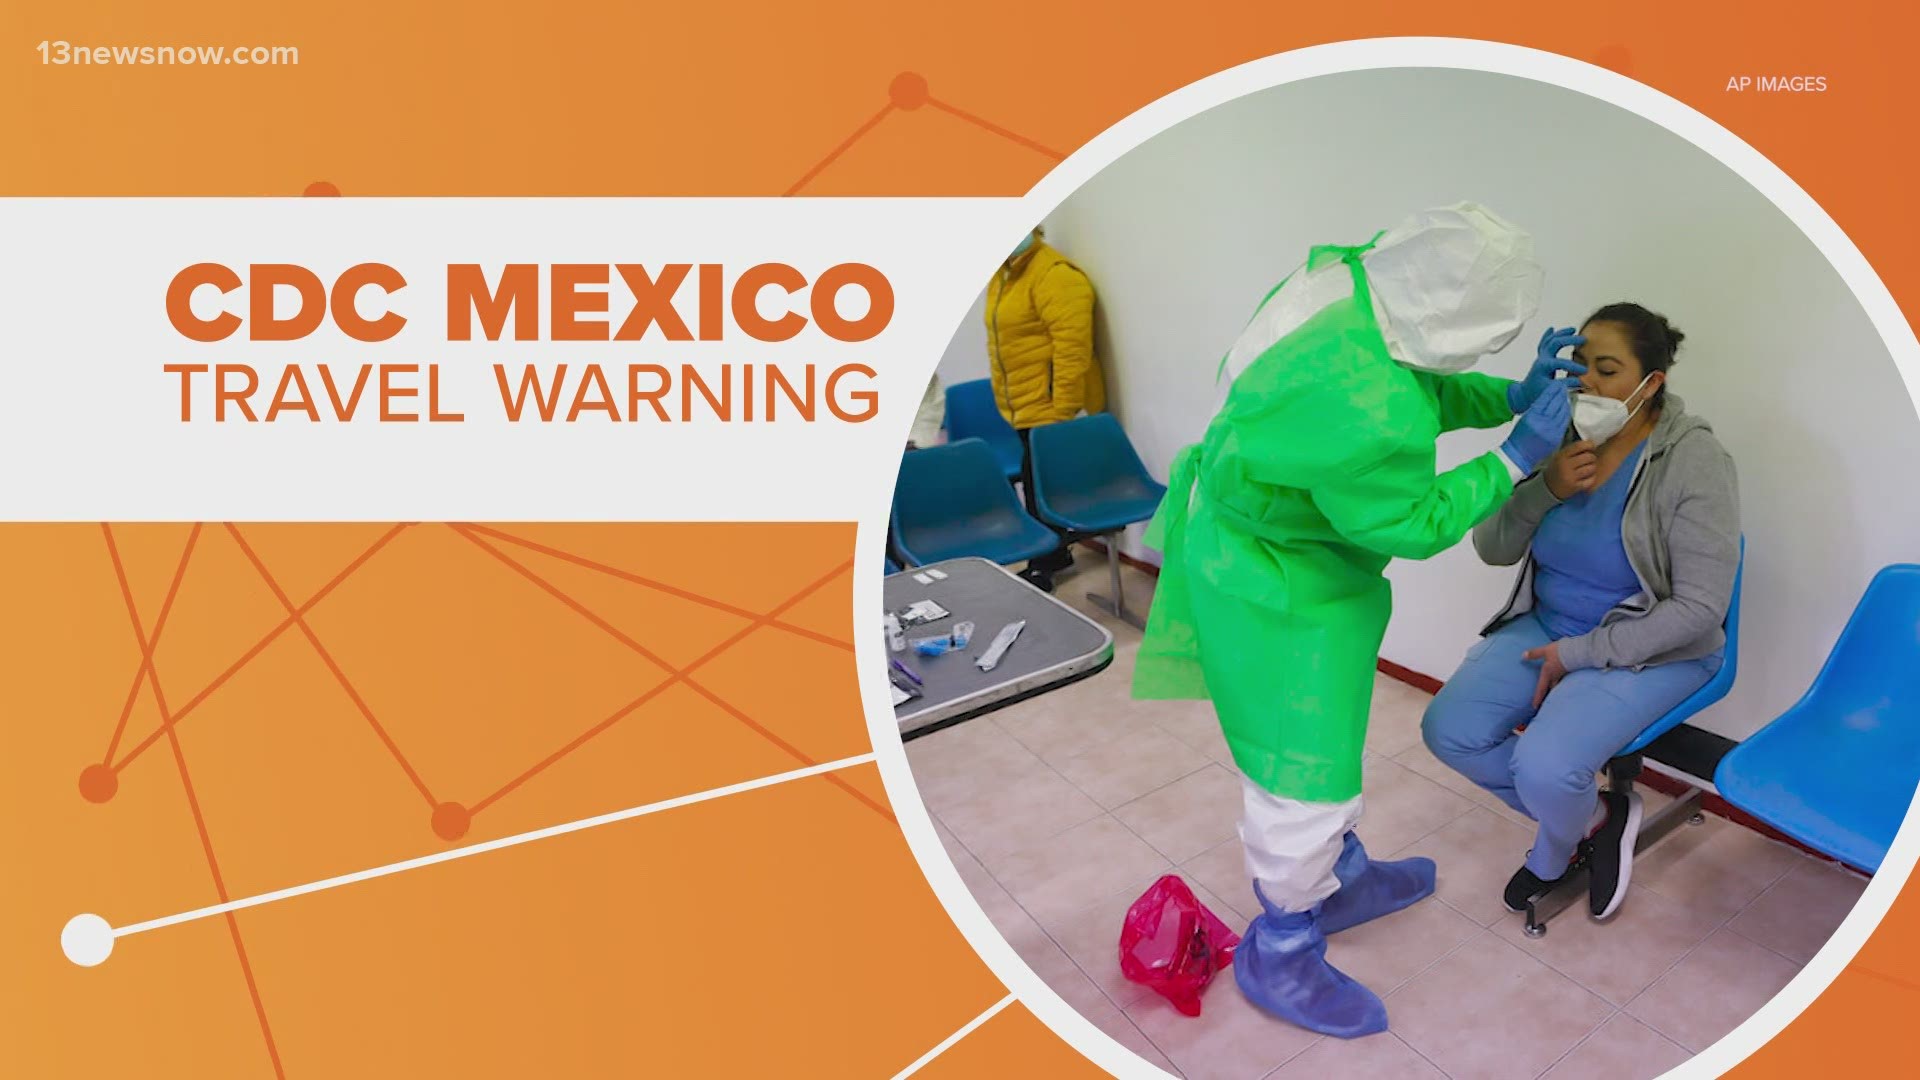 CDC warning travelers not to travel to Mexico as it has become a hotspot for COVID-19.